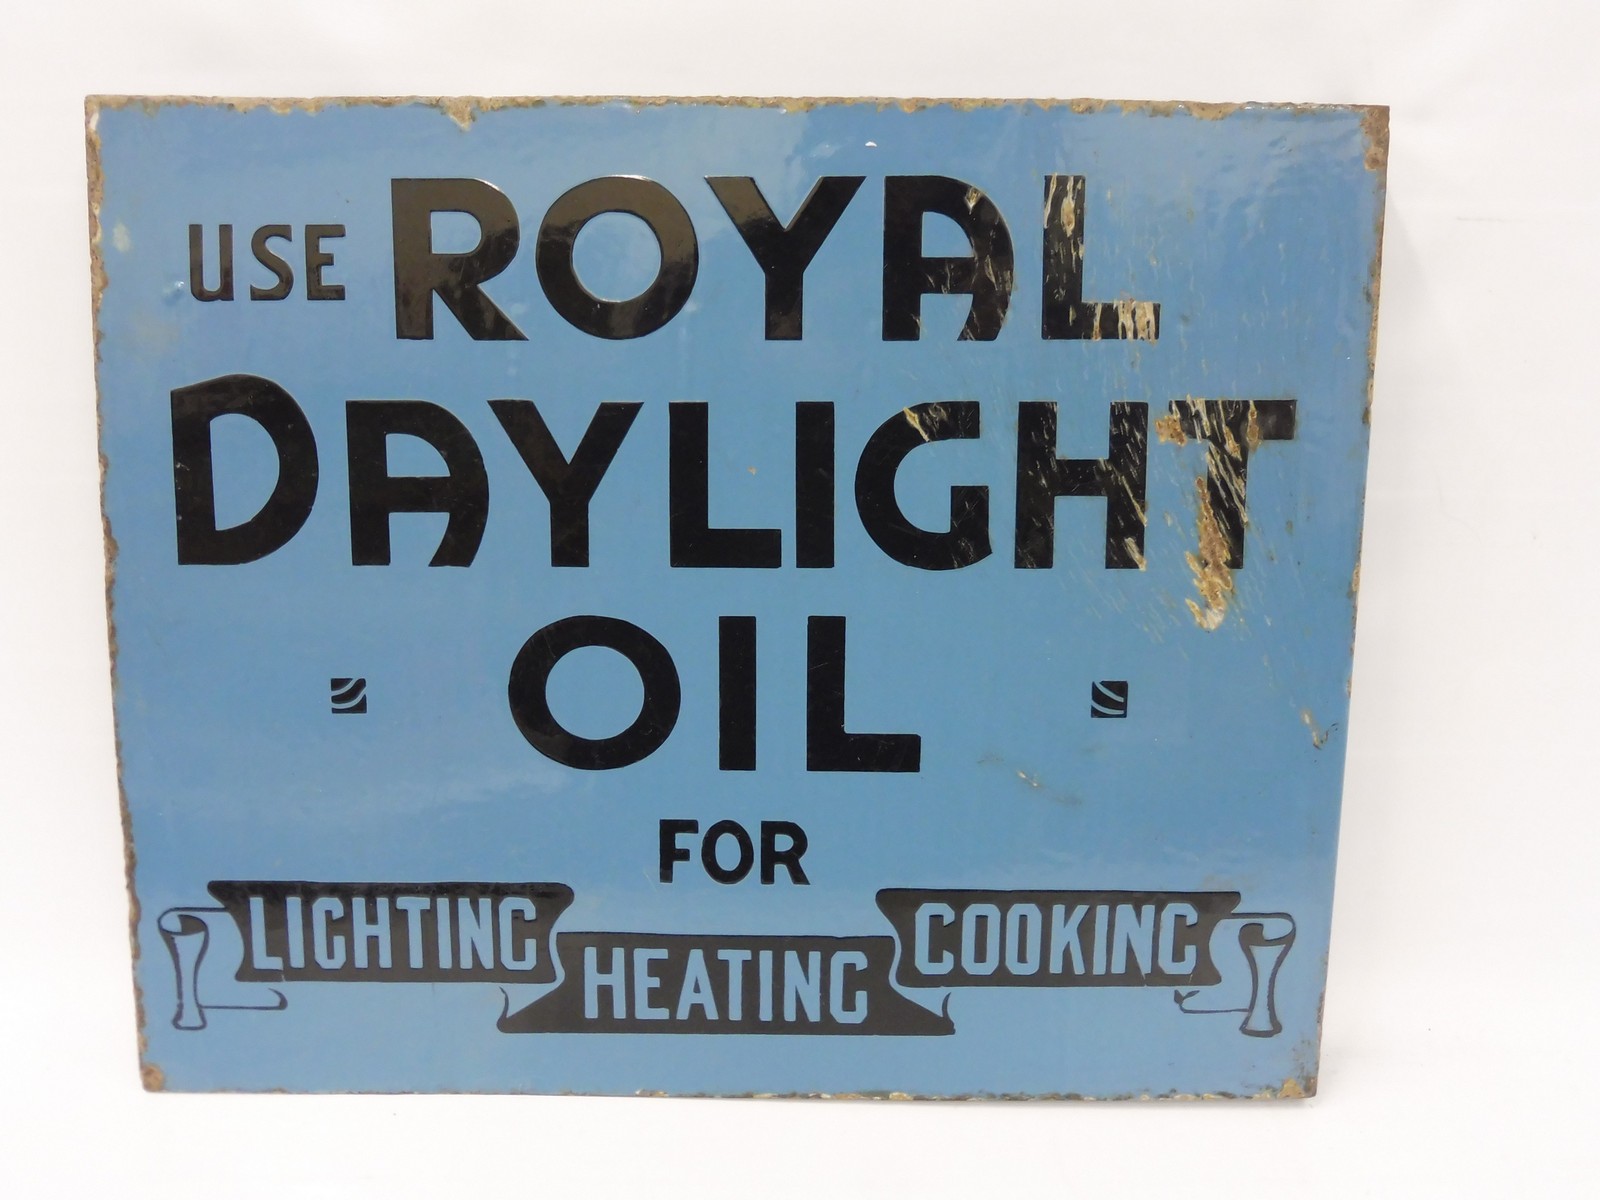 A Royal Daylight Oil for Lighting, Heating and Cooking double sided enamel sign with hanging flange, - Image 2 of 2